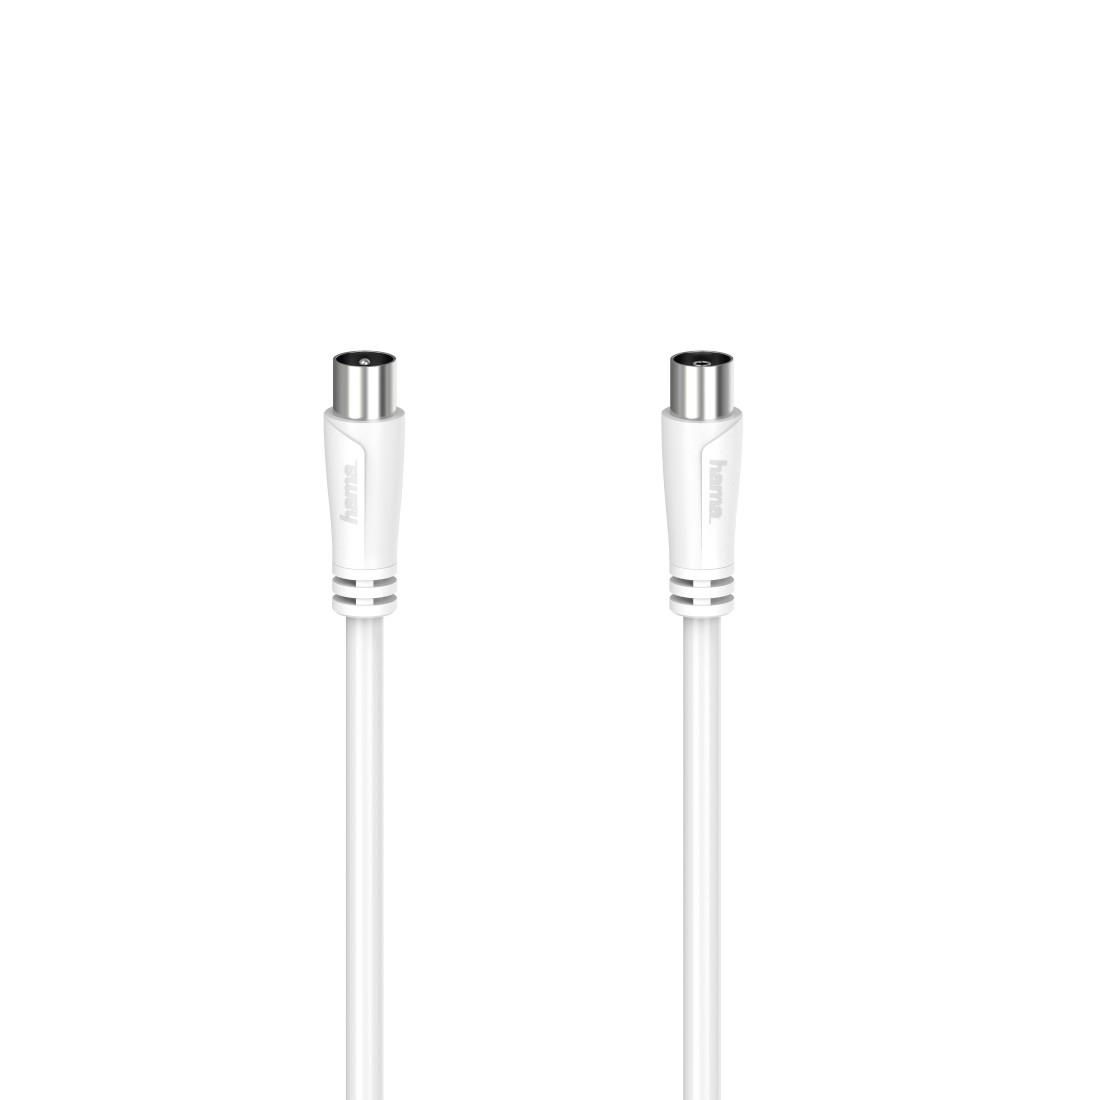 Hama 205046 W128824534 6 Coaxial Cable 3 M White 